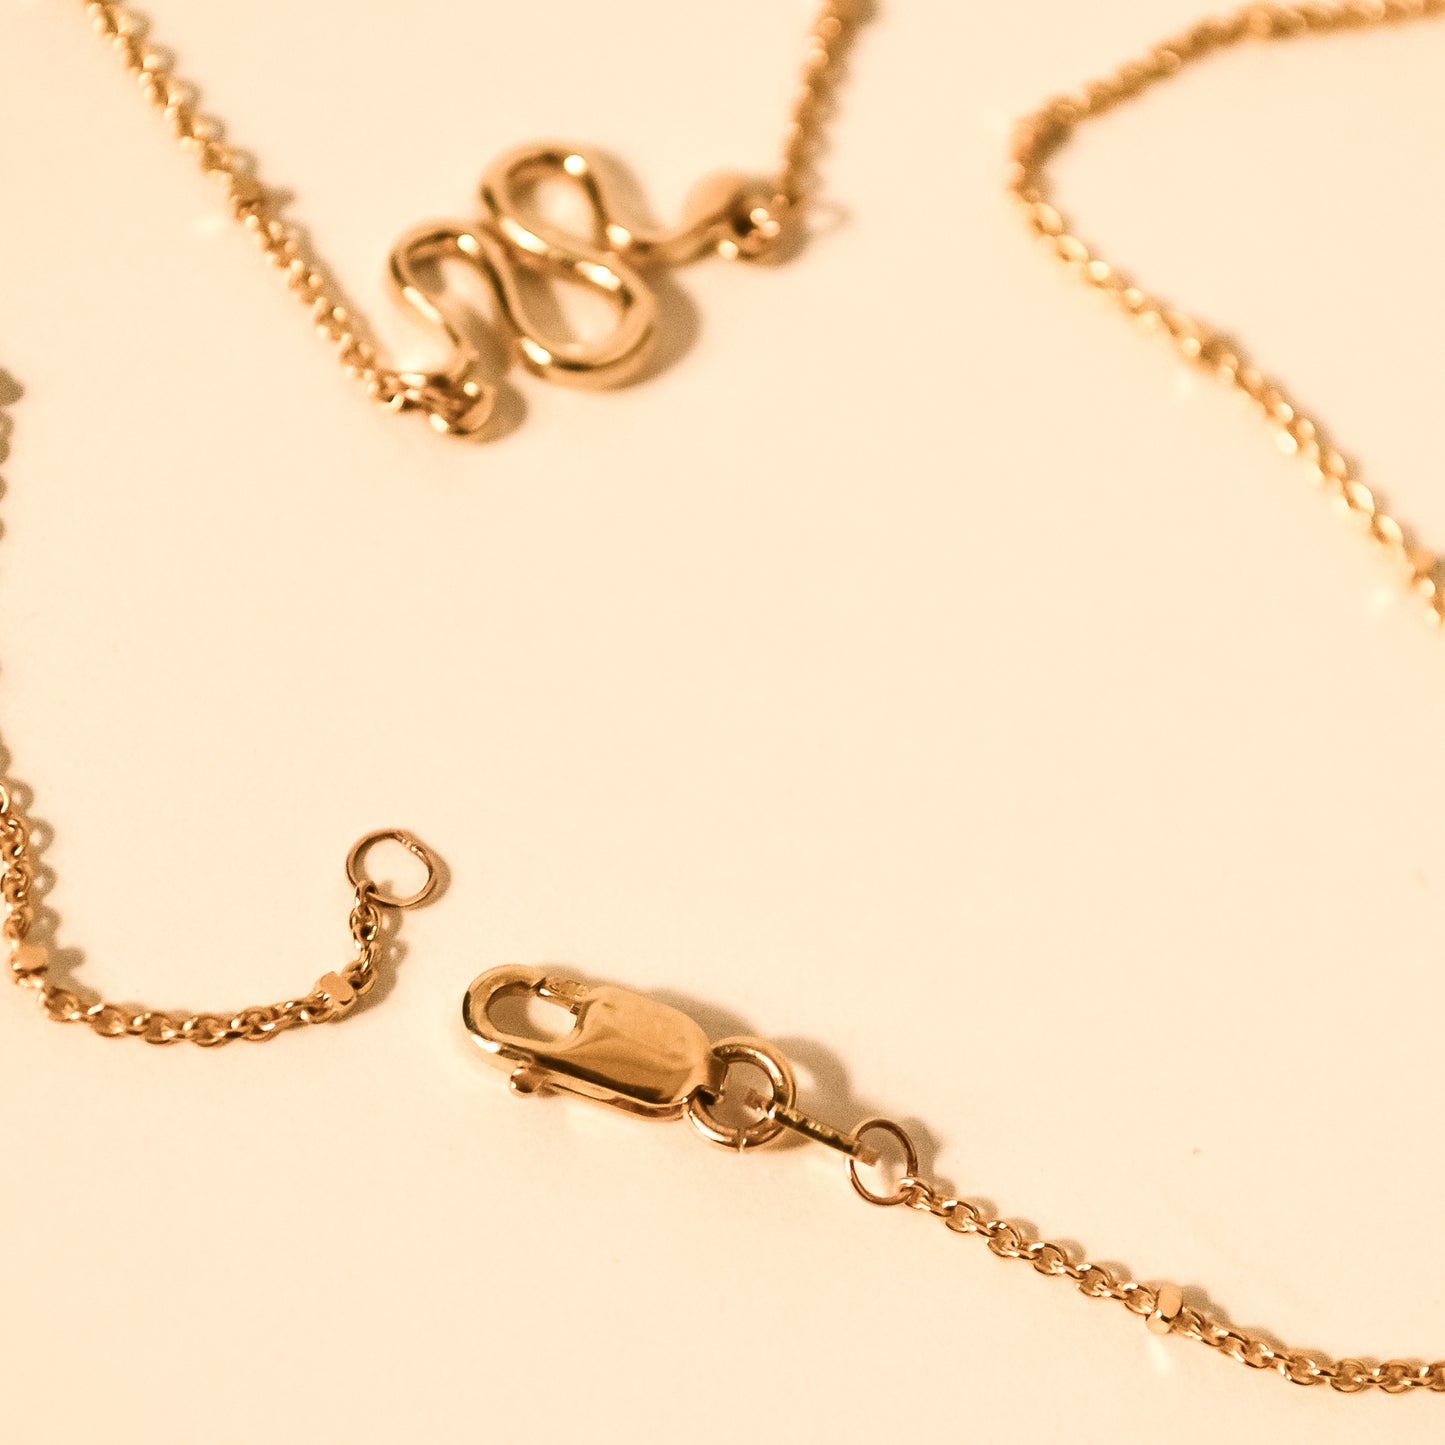 Mythos Snake Necklace in solid 9k yellow gold